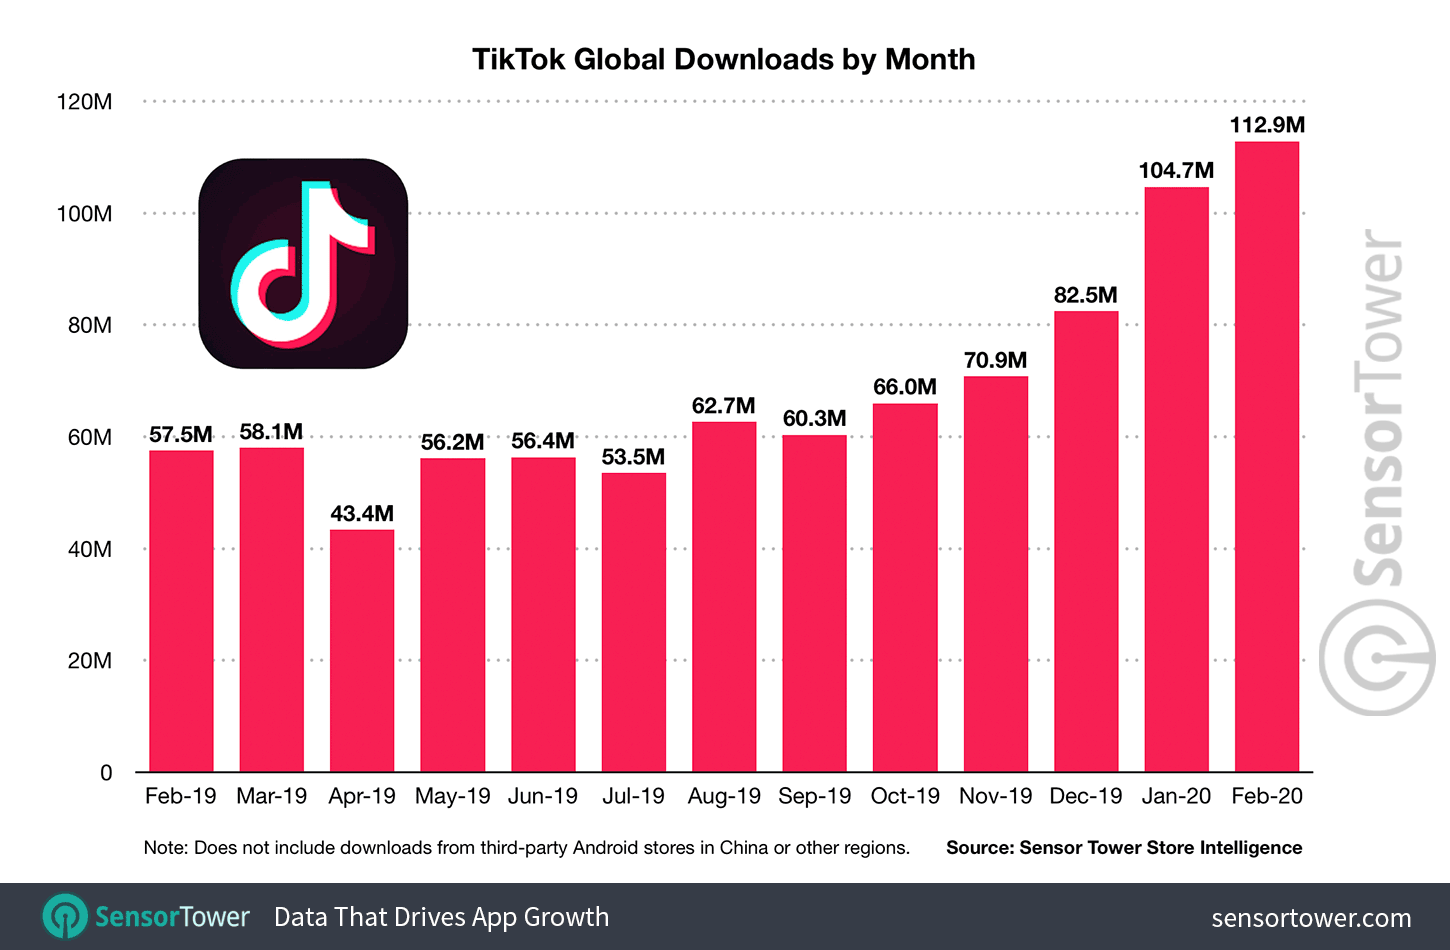 tiktok continues to gain momentum but challenges remain in maximizing the apps growth